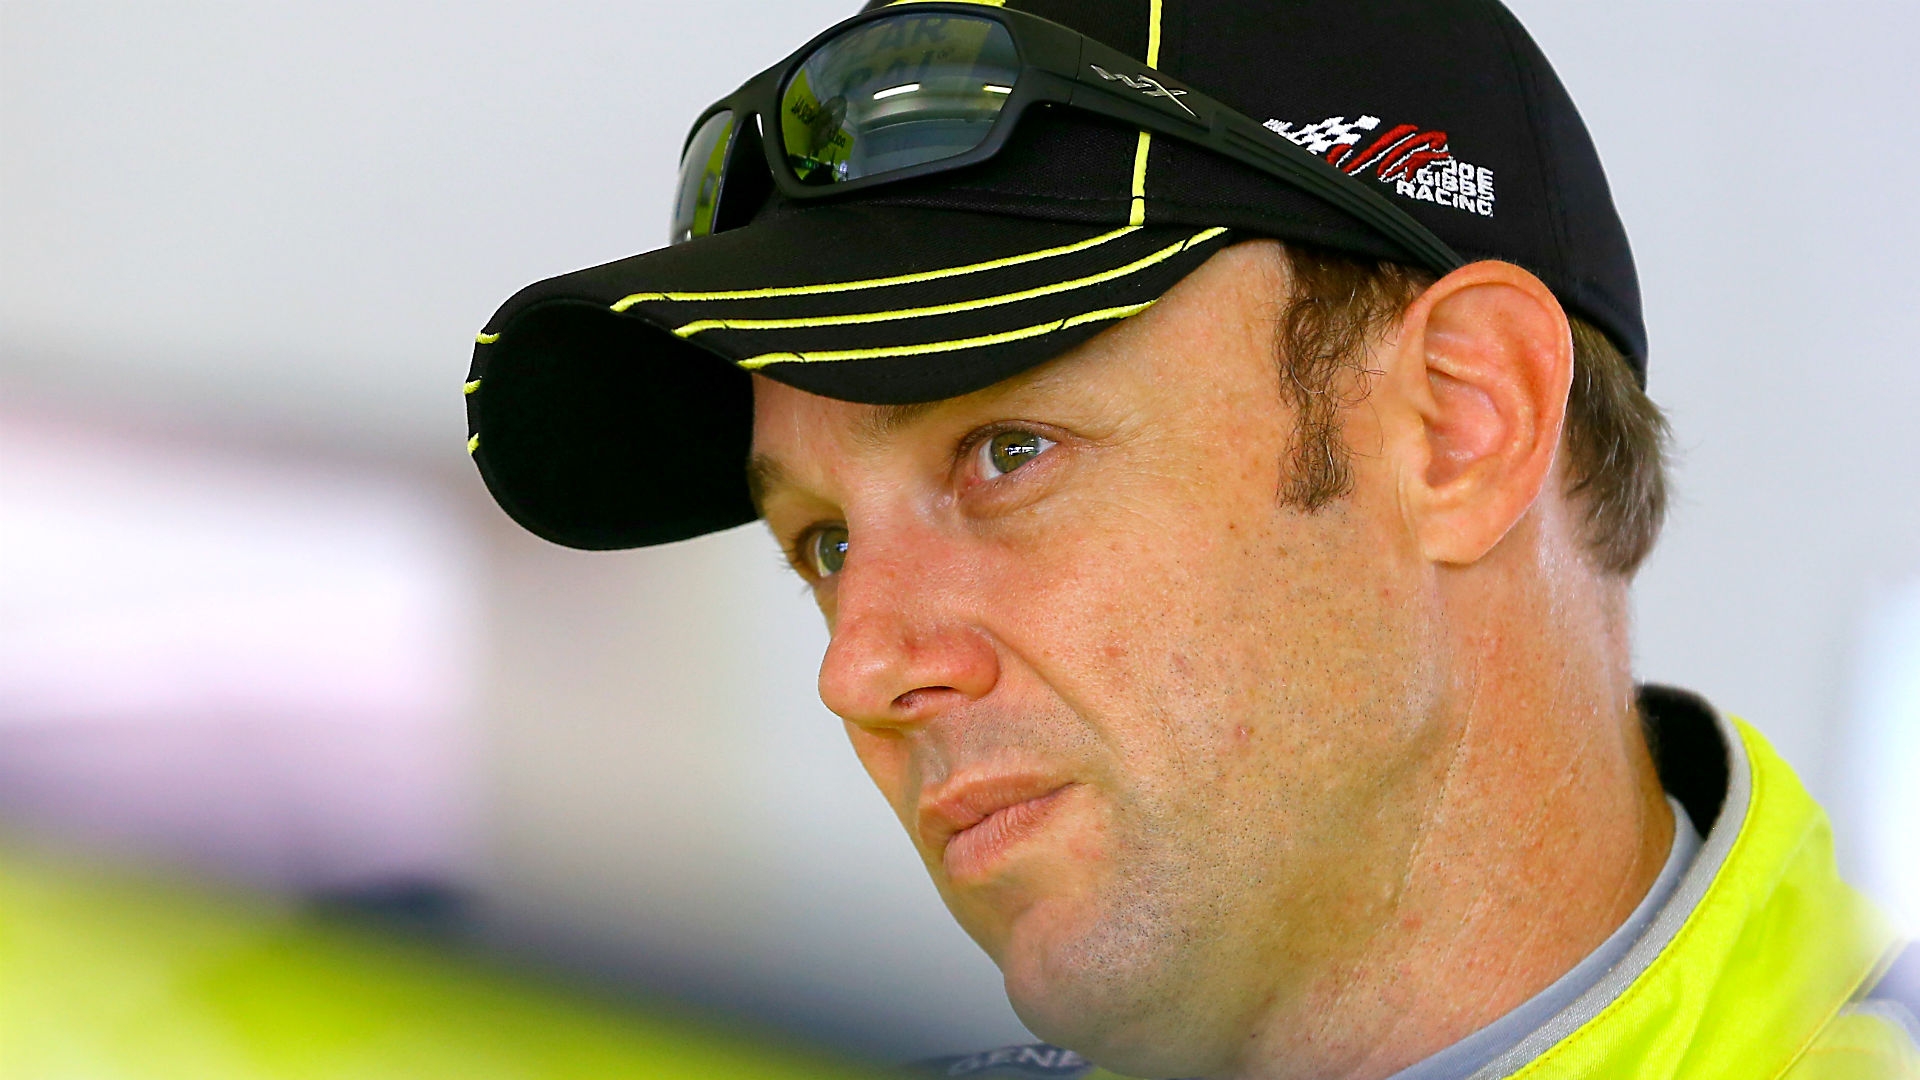 Matt Kenseth learned during suspension who his true friends are